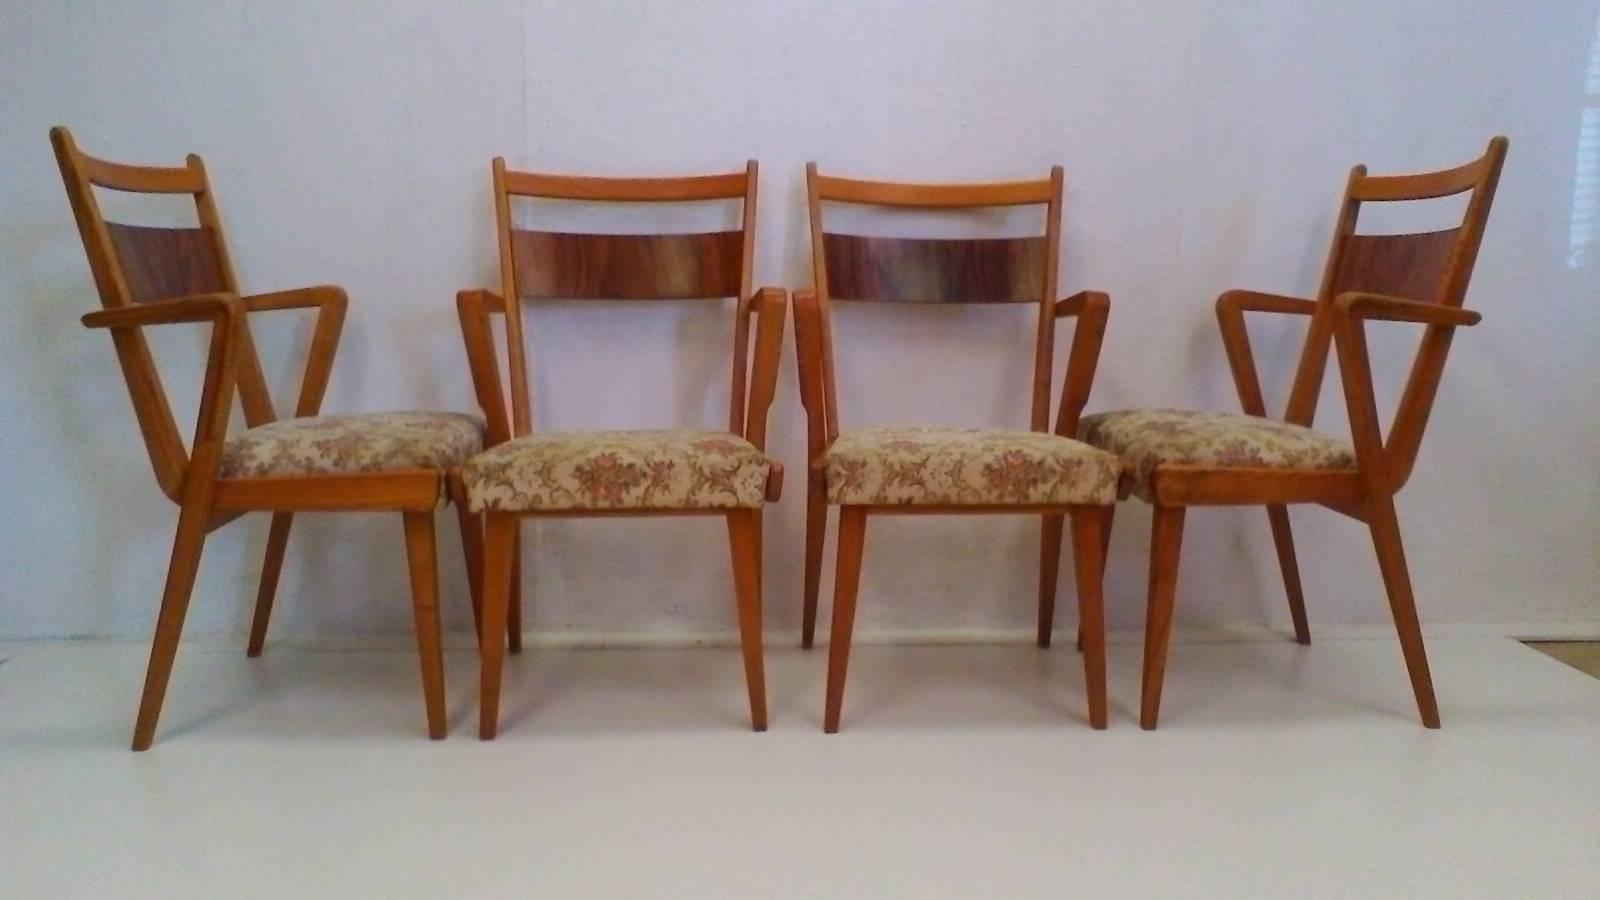 This chairs are made in National company Jitona, Czechoslovakia. The items made are from ashwood, walnut veneer. Original very good condition.